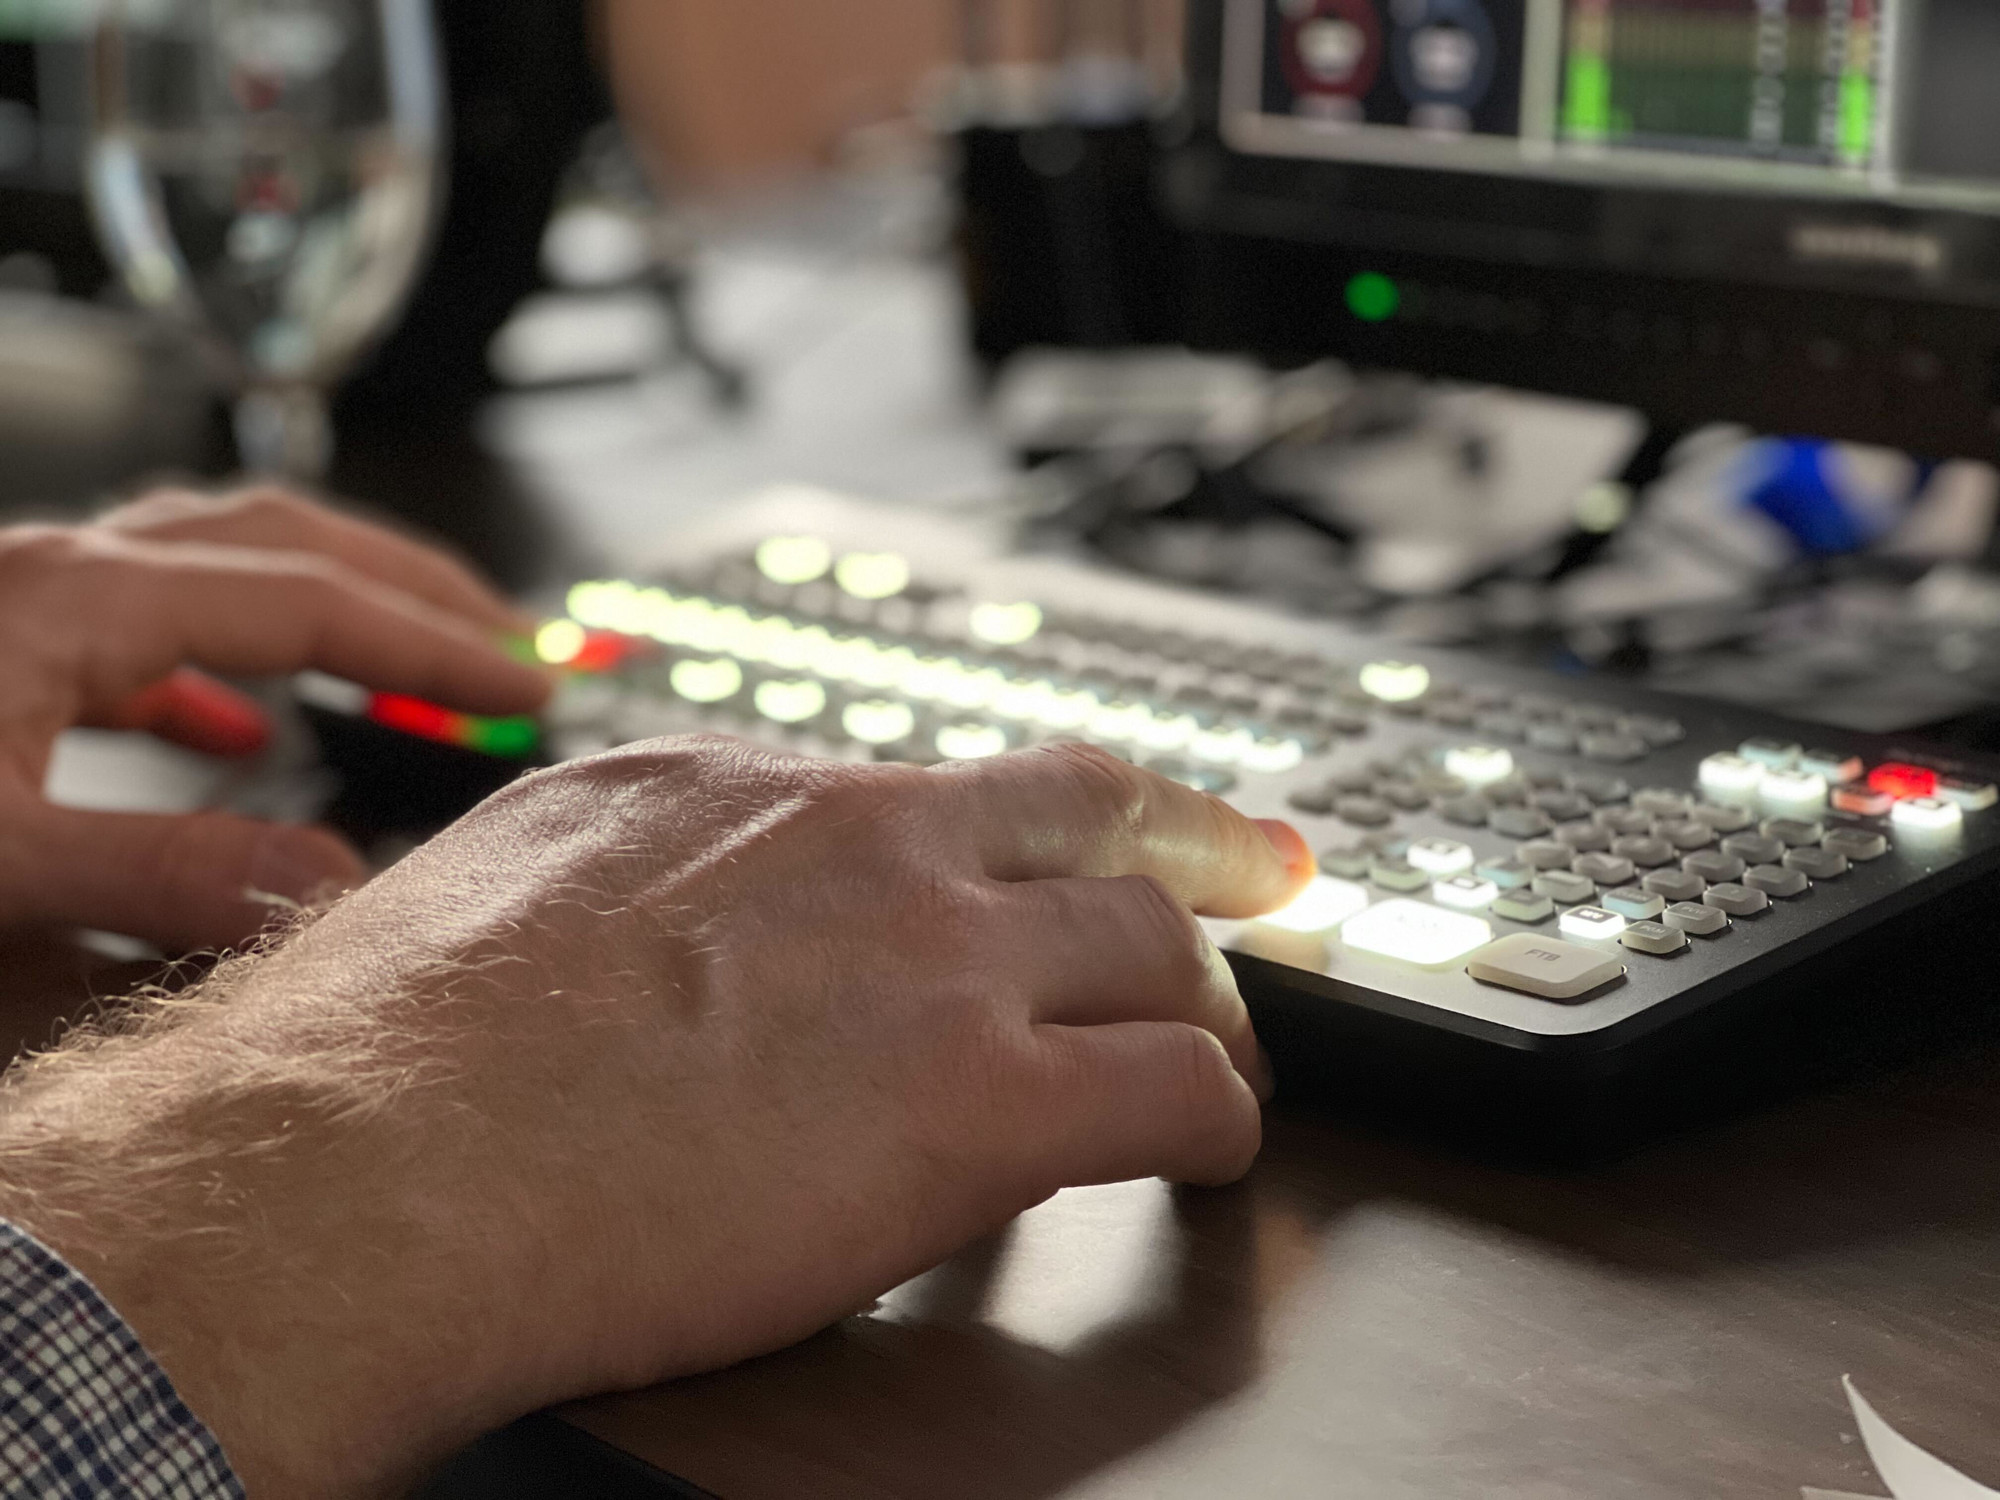 A closeup of hands using a keyboard to edit a video